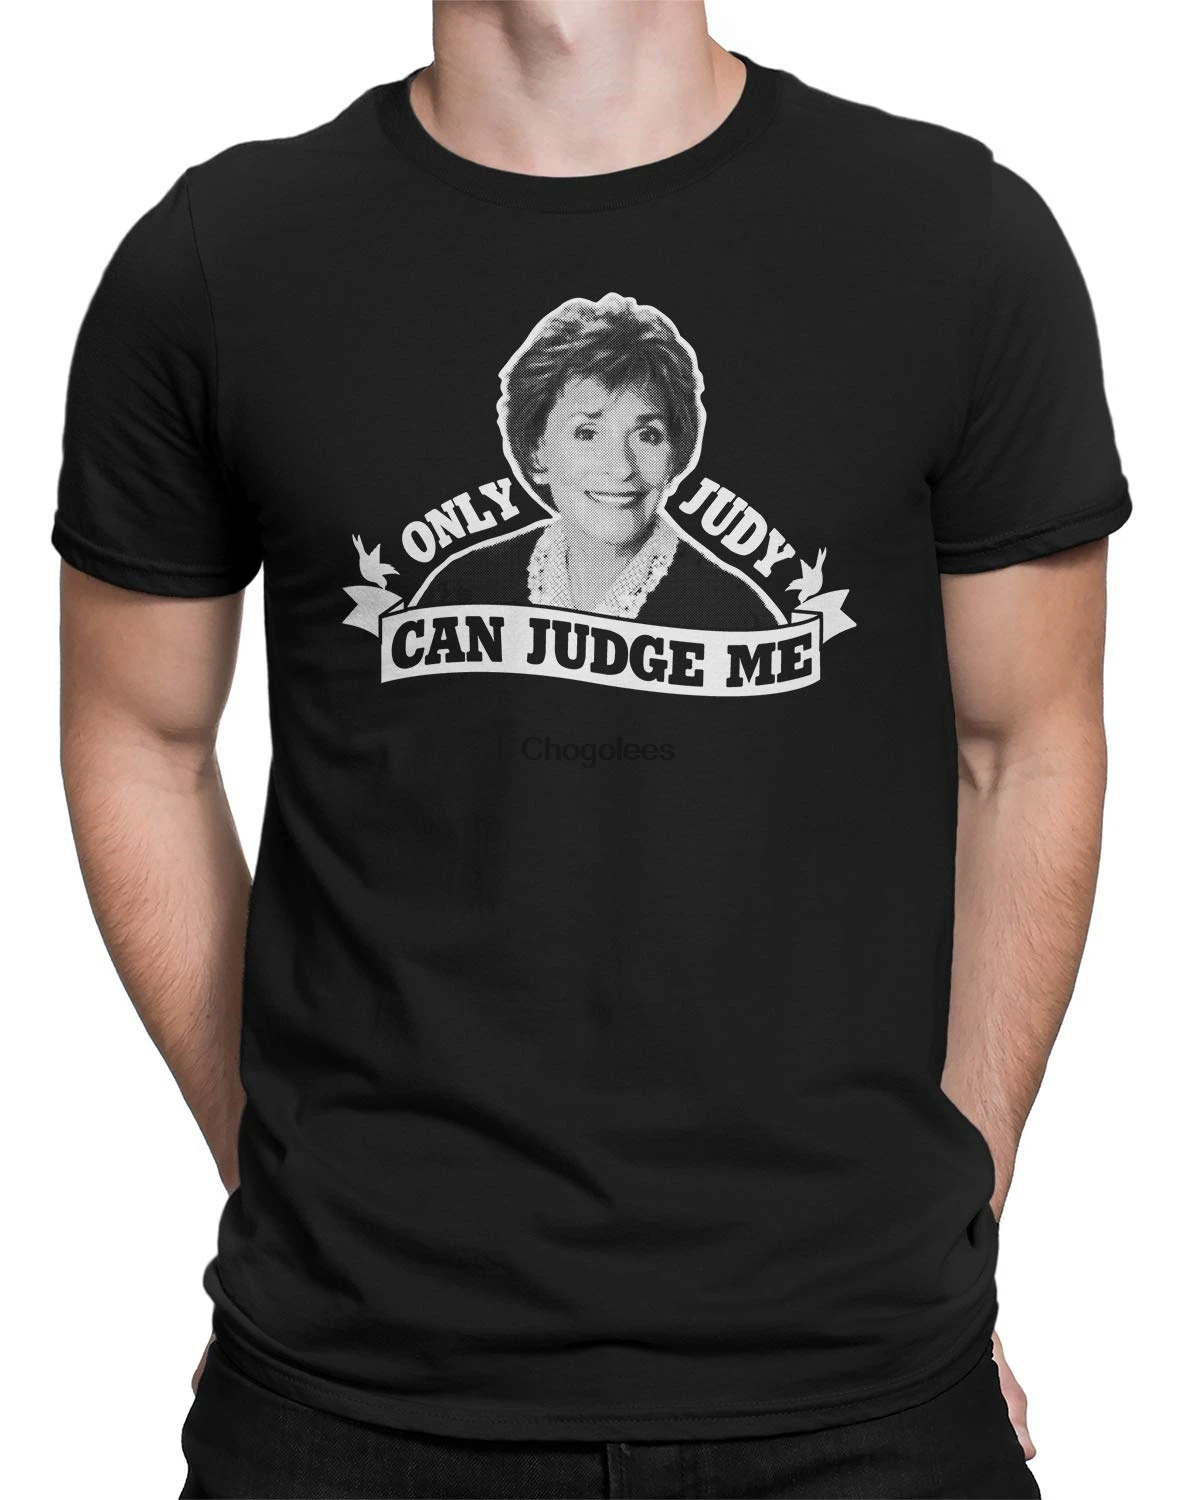 NEW LIMITED Only Judy Can Judge Me Premium Gift Idea Tee T-Shirt S-3XL Available